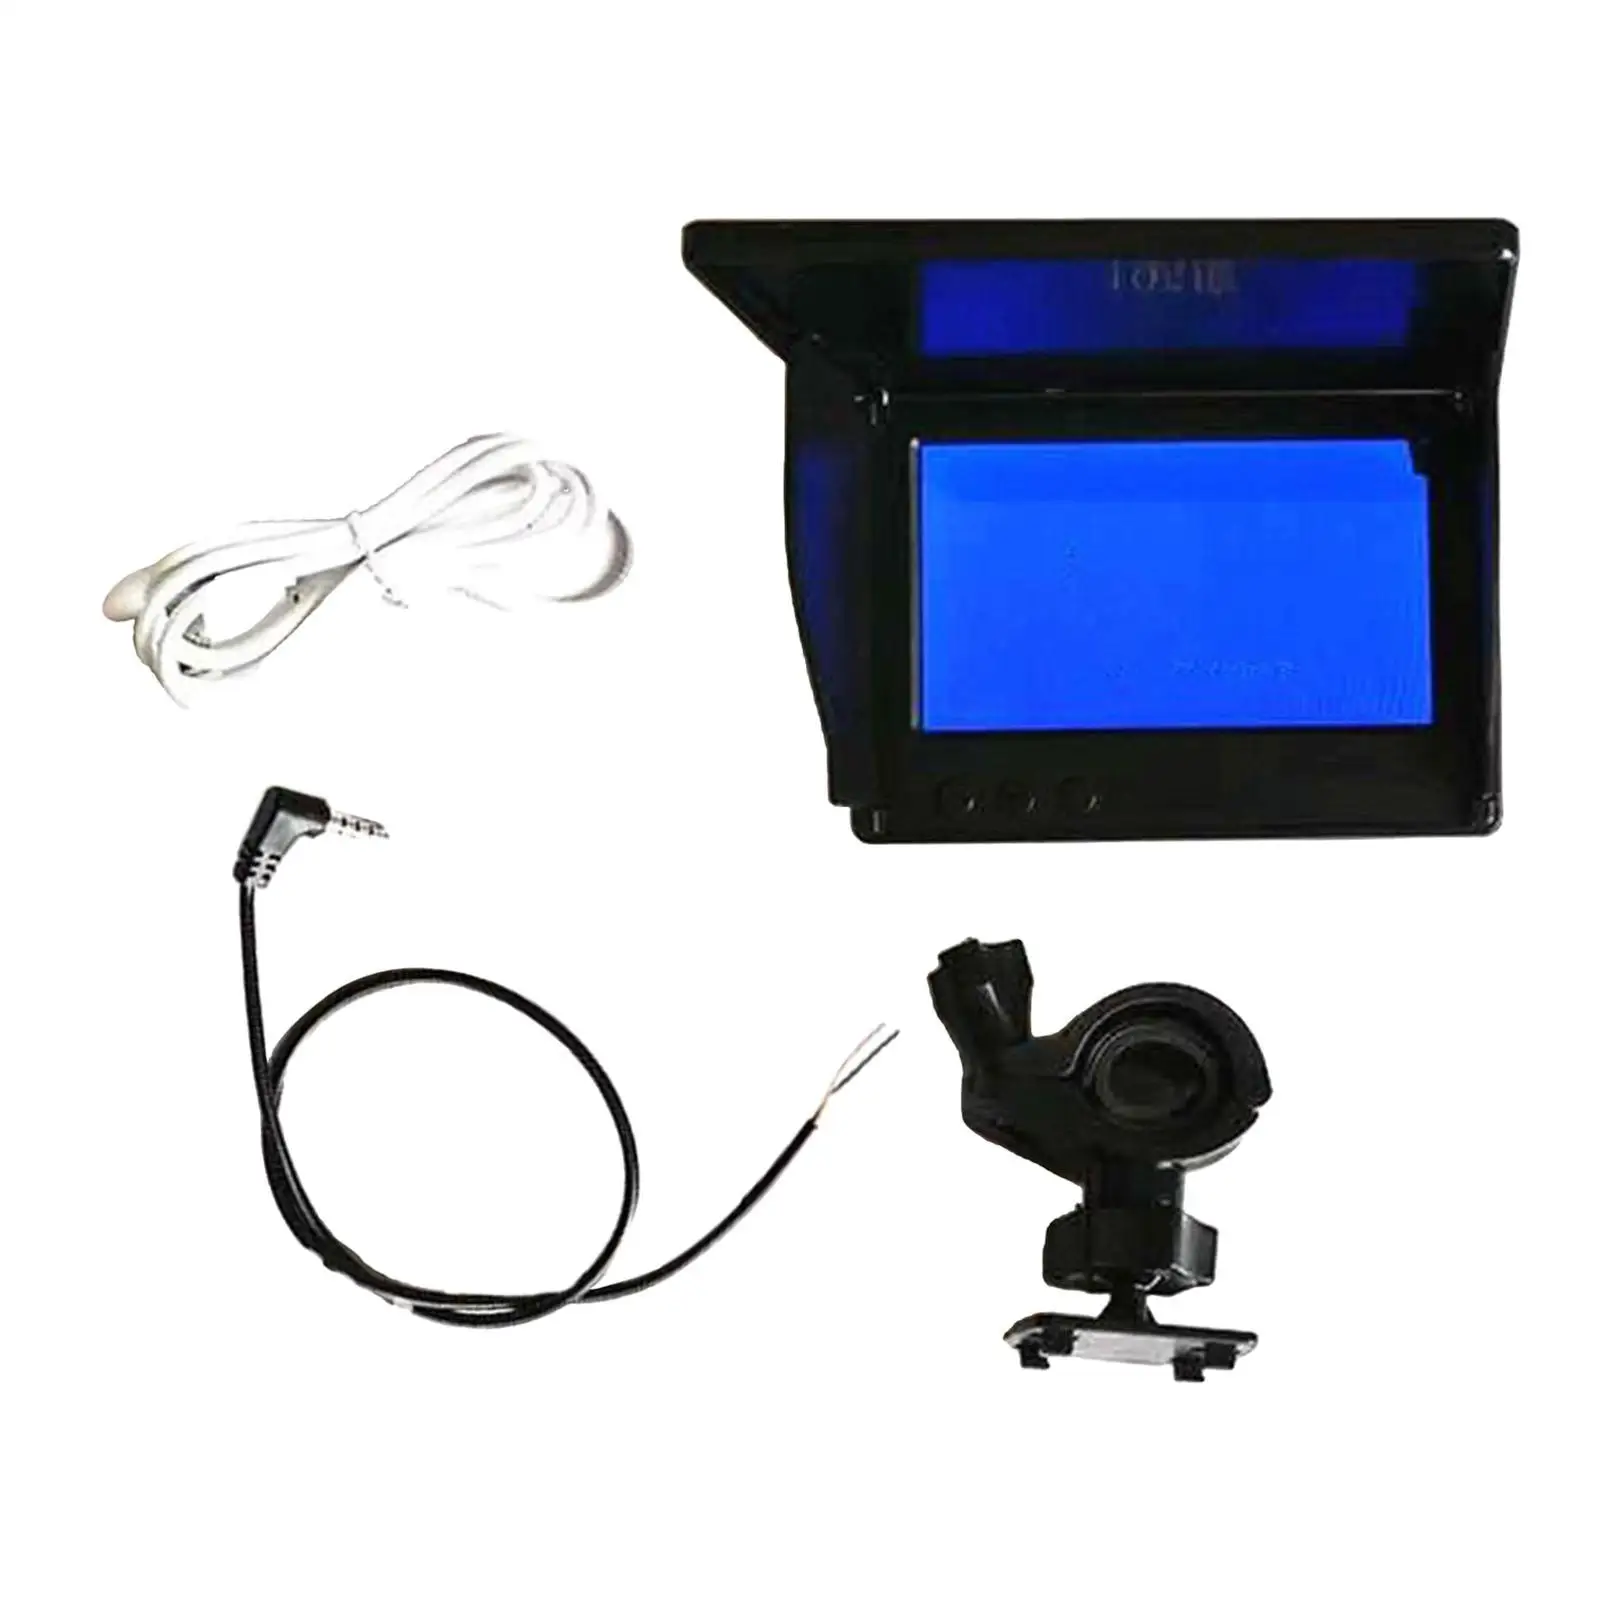 HD Fish Finder Display Screen with Folding Sun Cover for Fishing Accessories